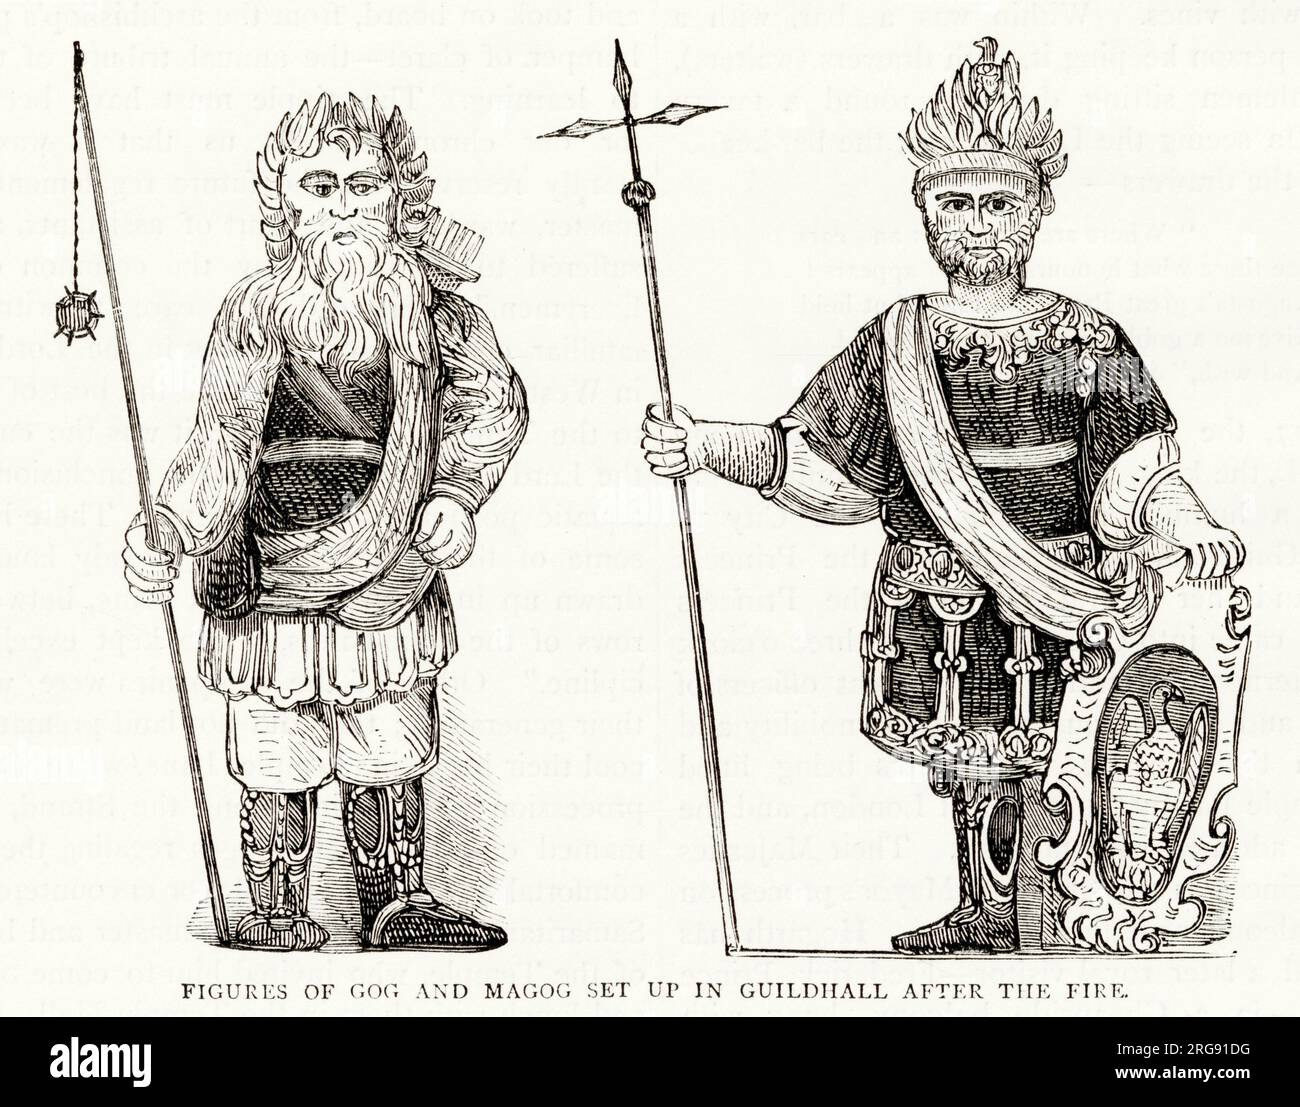 Figures of Gog and Magog, guardians set up in the Guilhall, London, after the fire. Stock Photo